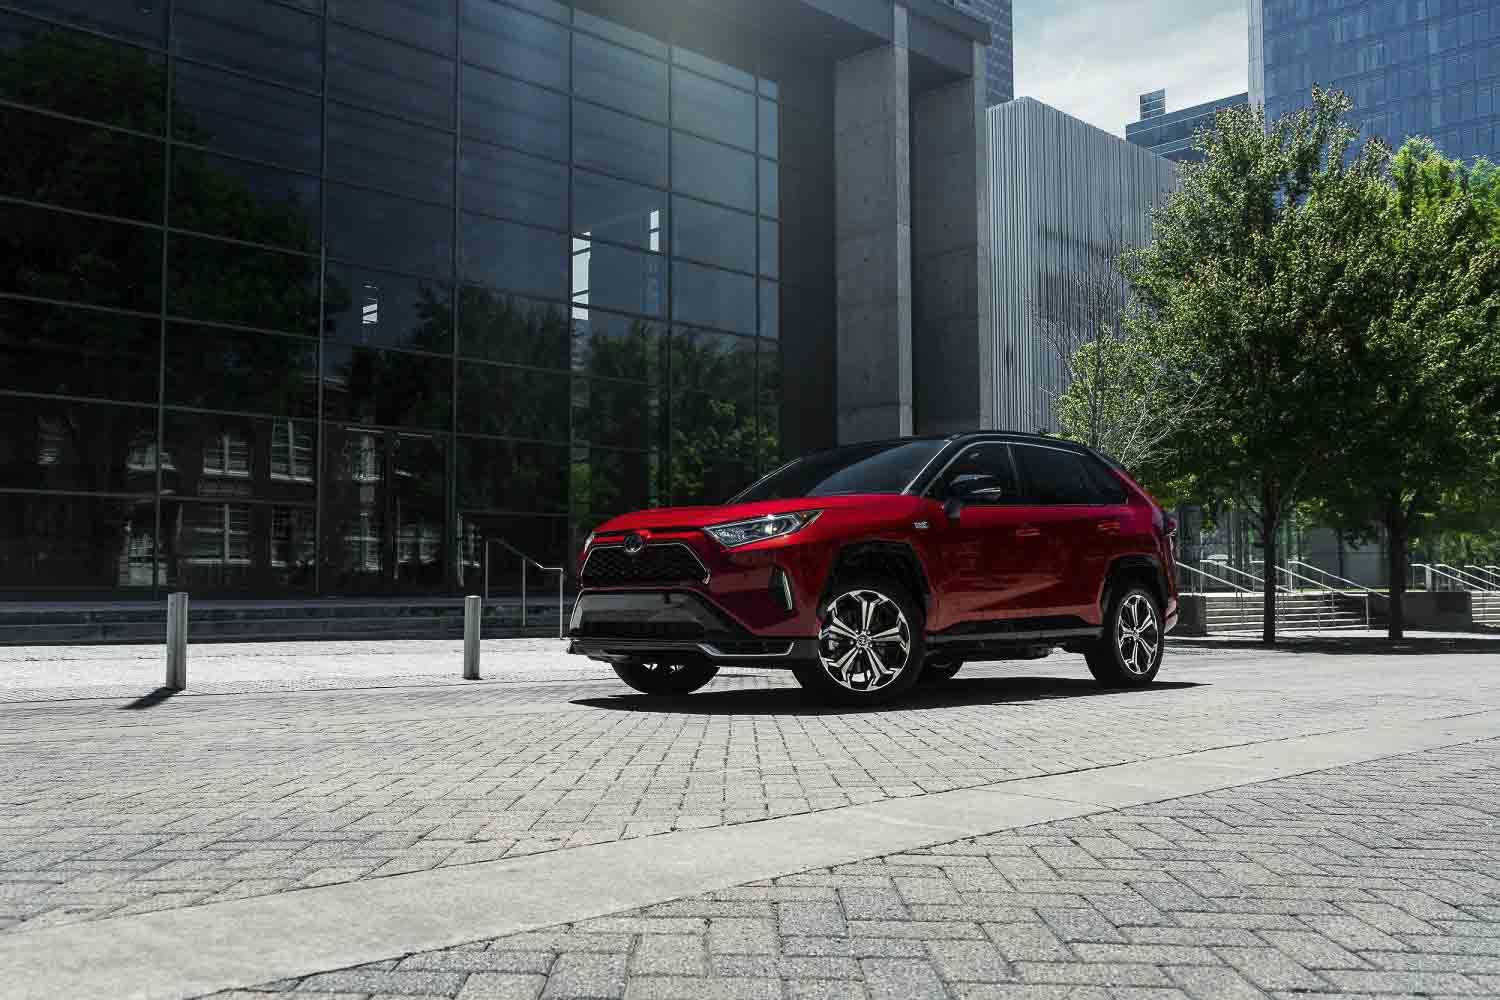 three quarter front view of the 2021 Toyota RAV4 parked on a street